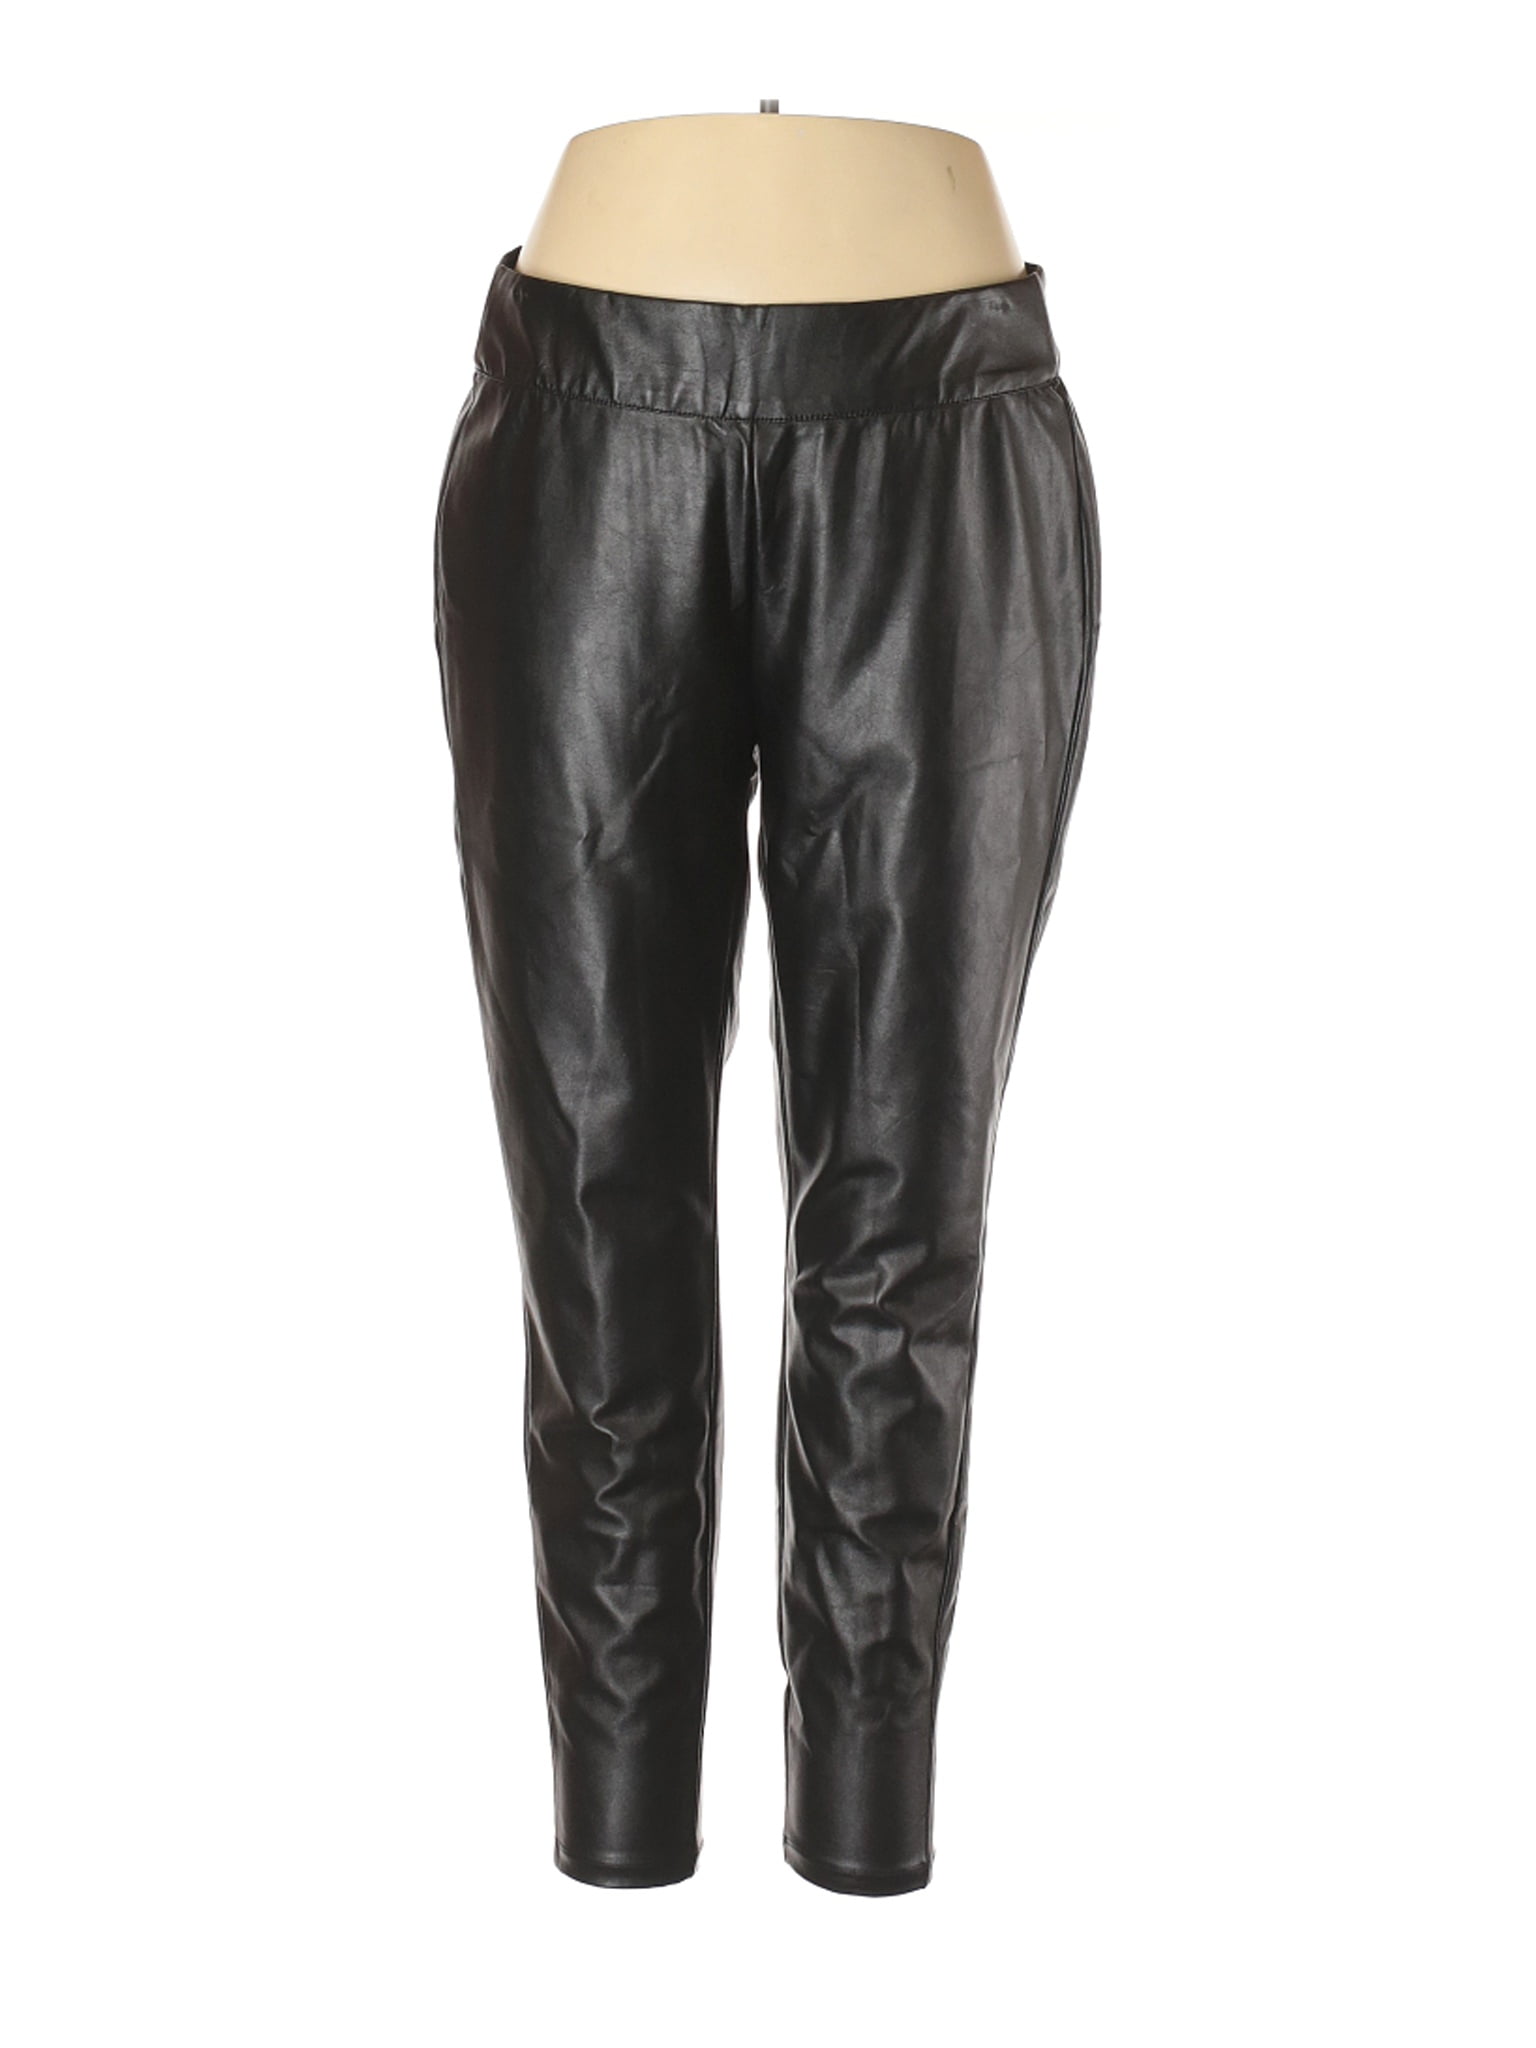 leather pants size 18